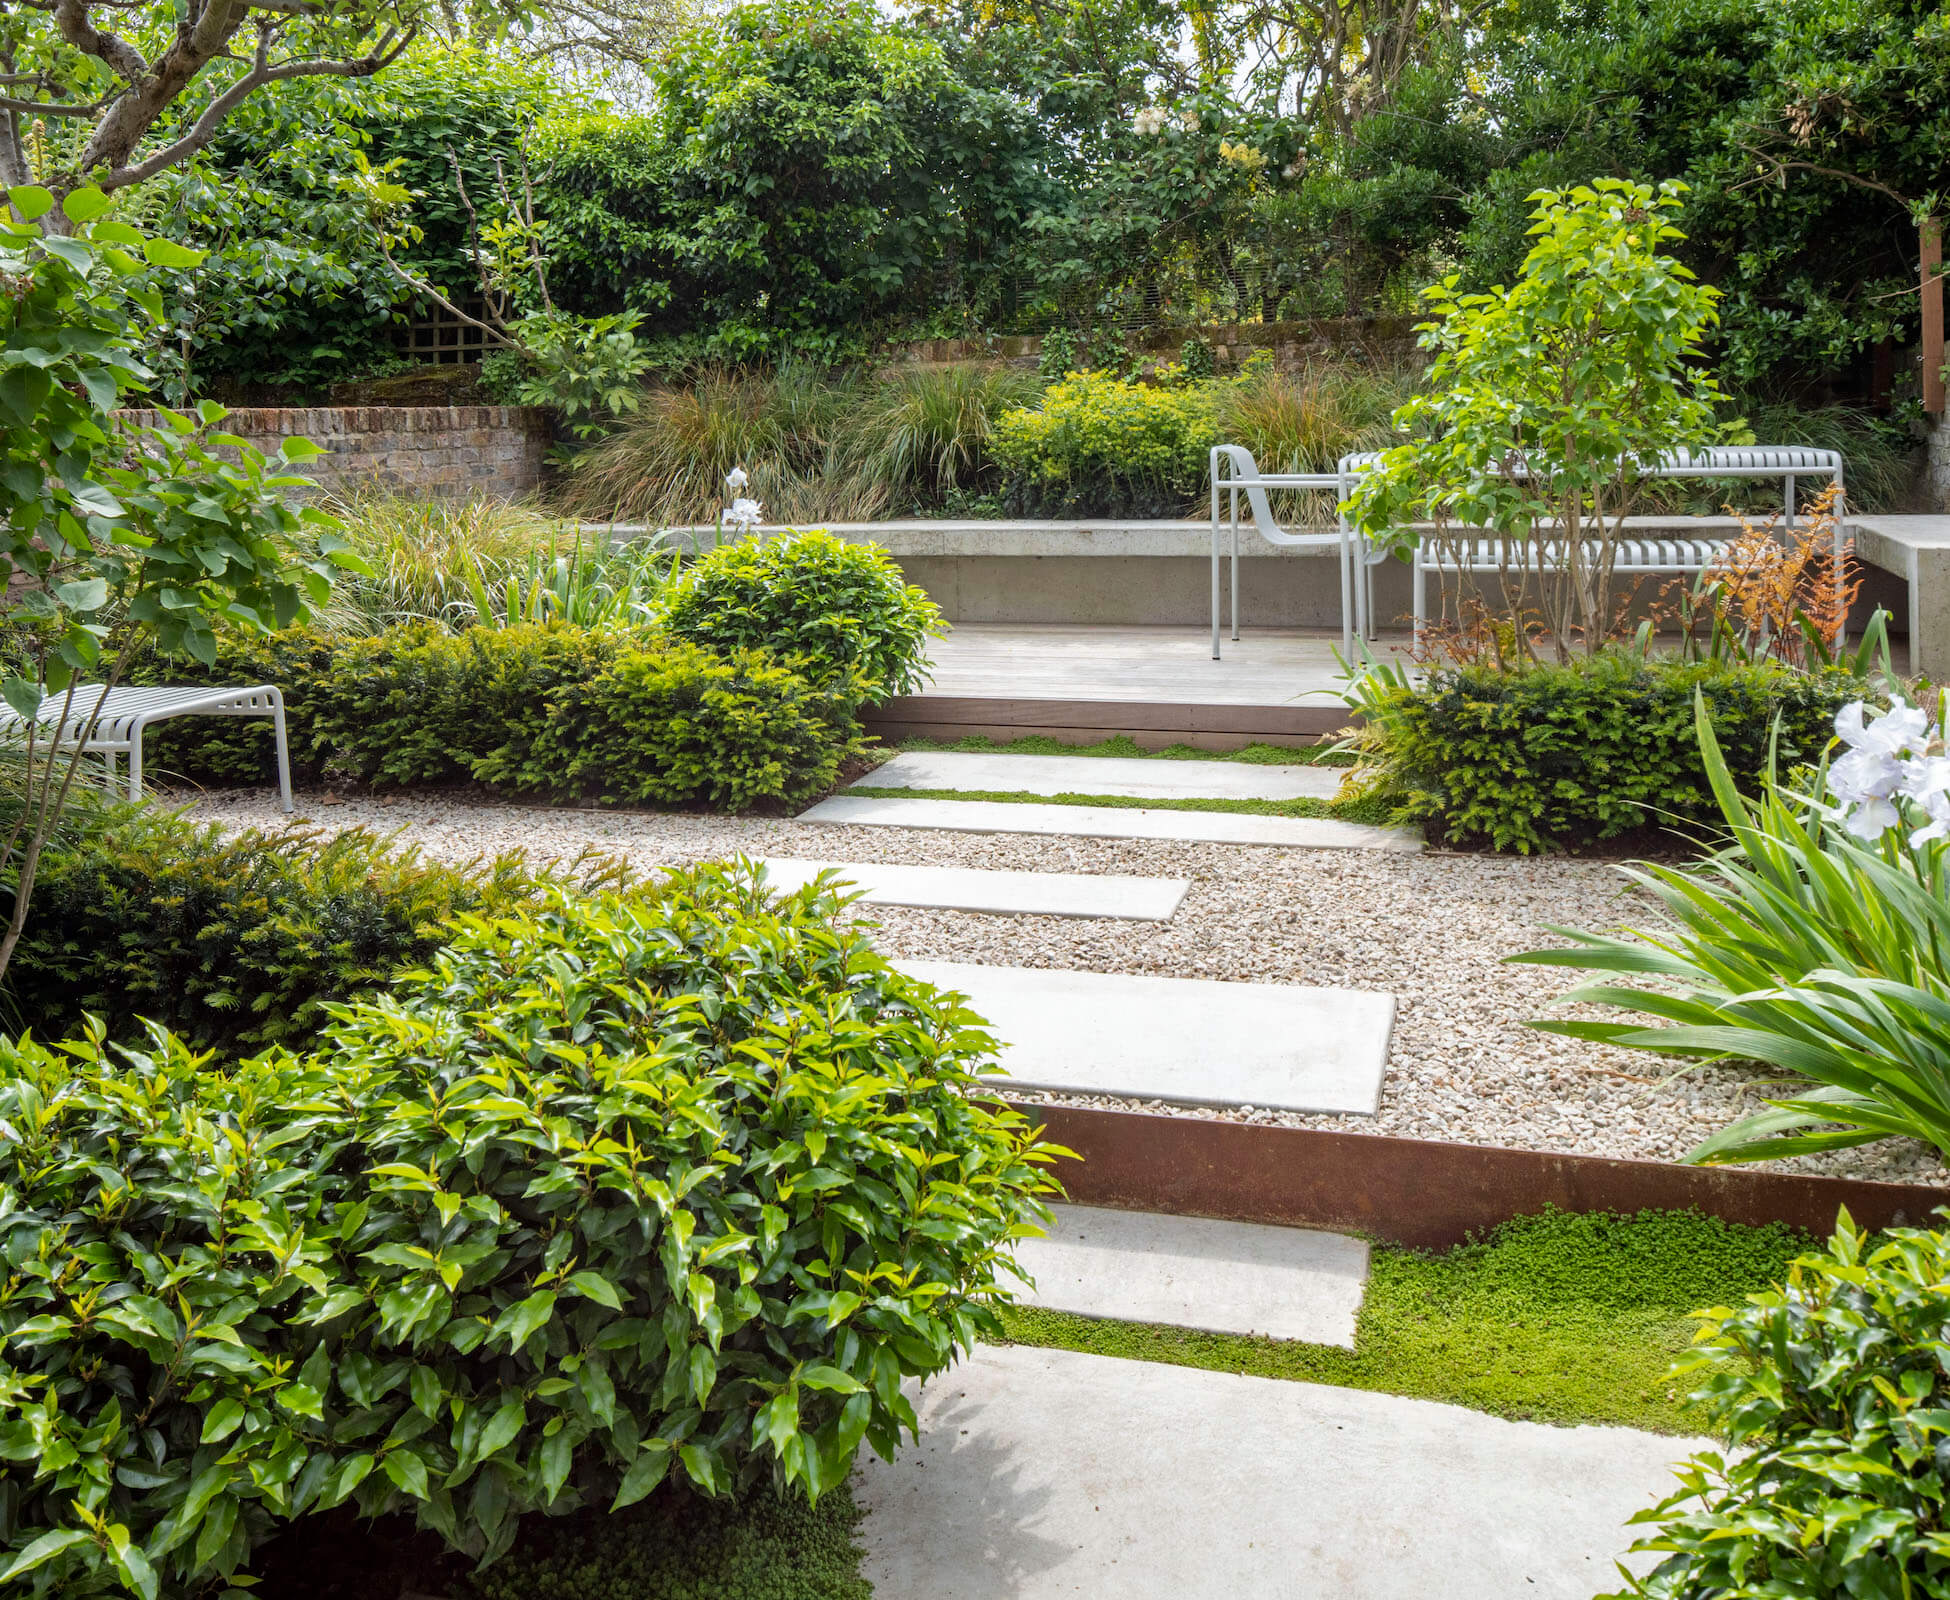 We used quite a subtle palette of materials and planting in this garden, to emphasise the feeling of width and space. Poured concrete stepping stones and Quartzite gravel are the key materials, with hardwood deck and edging in Corten steel.